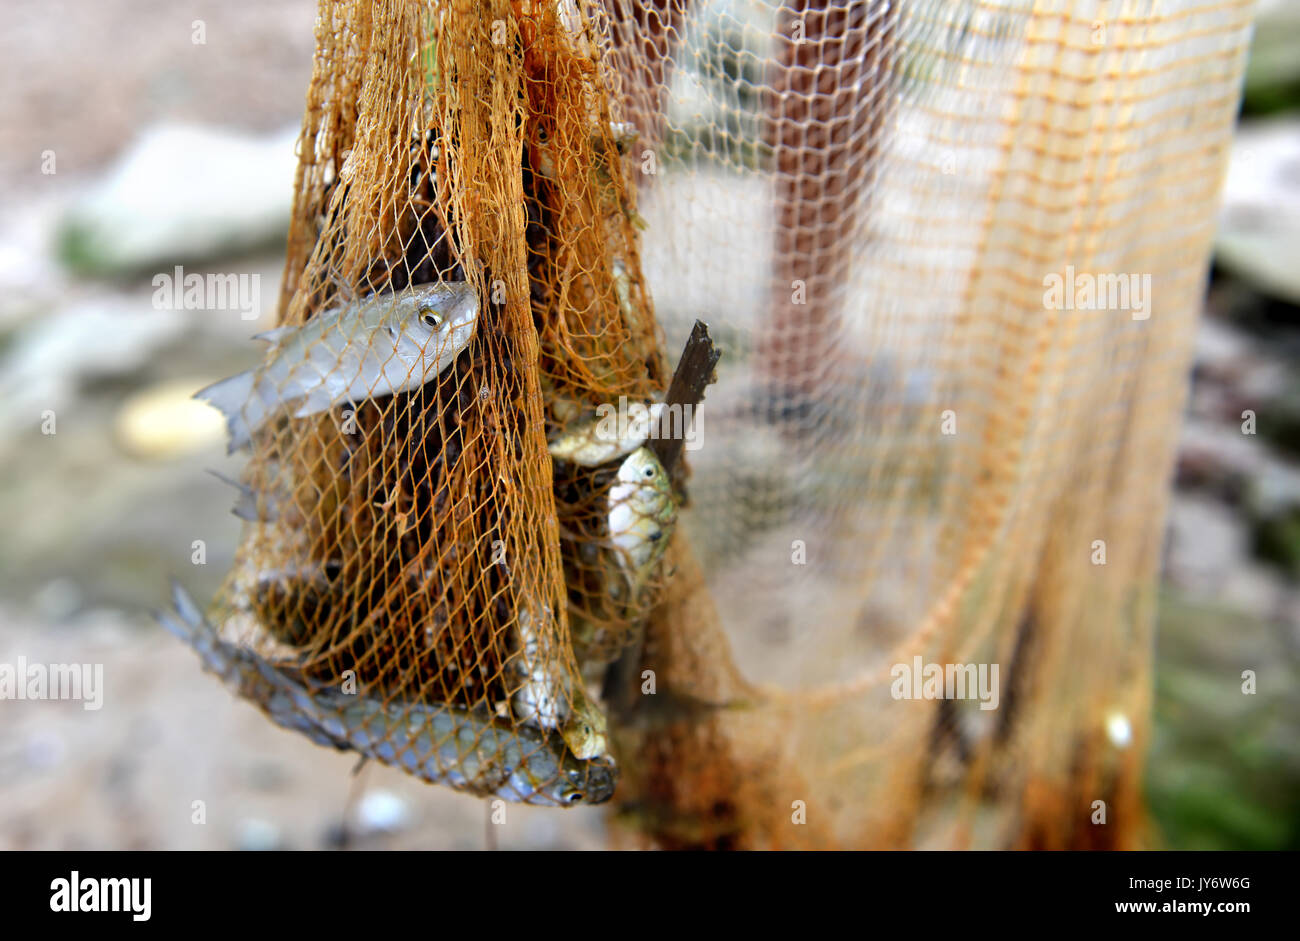 Death small fishes from the sea for food catch by fishery nest with outdoor lighting. Stock Photo